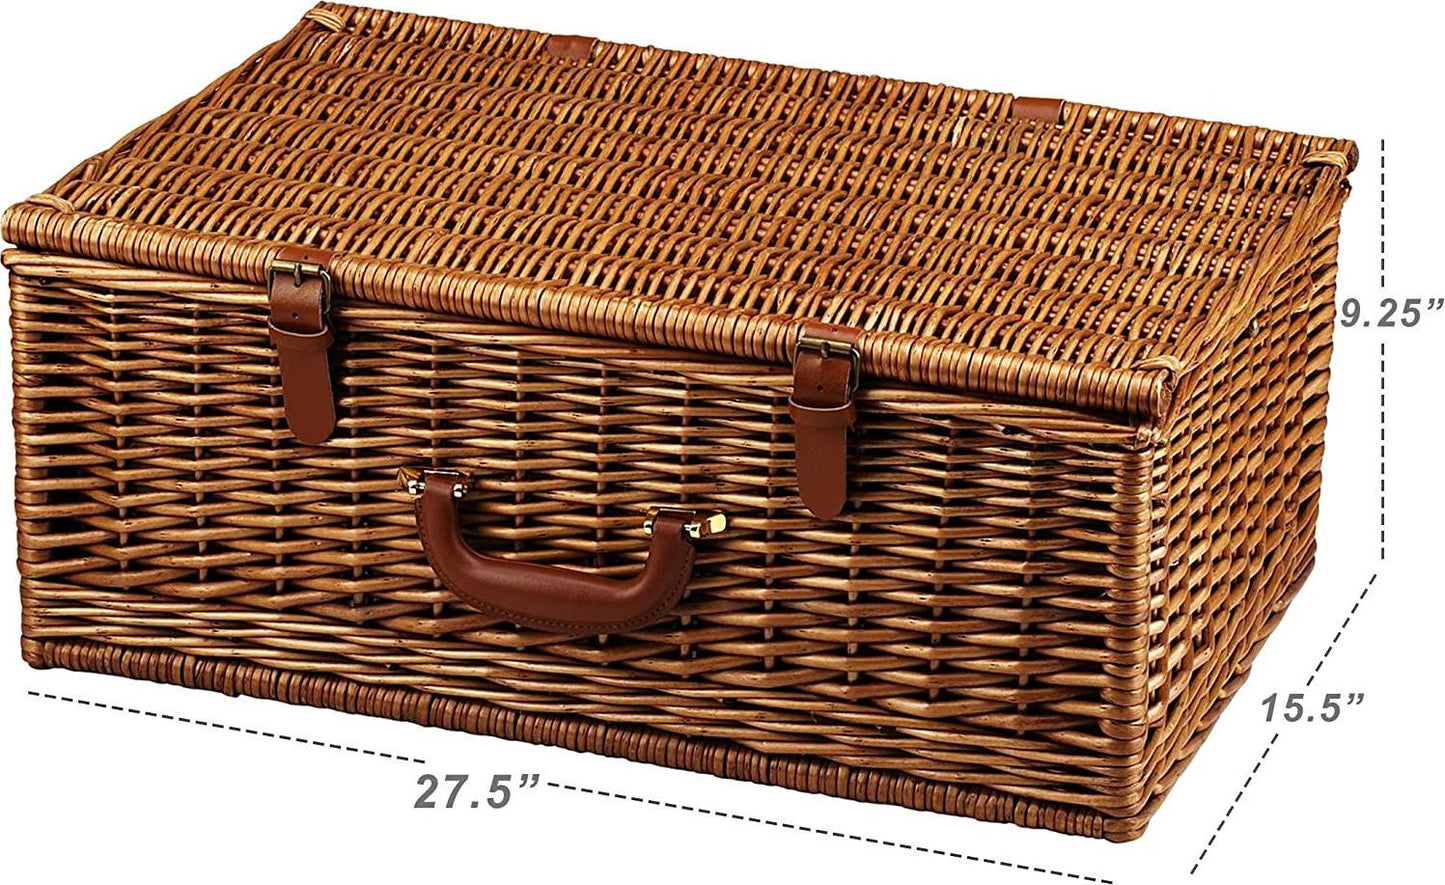 Picnic at Ascot Dorset English-Style Willow Picnic Basket with Service for 4 and Coffee Set - London Plaid